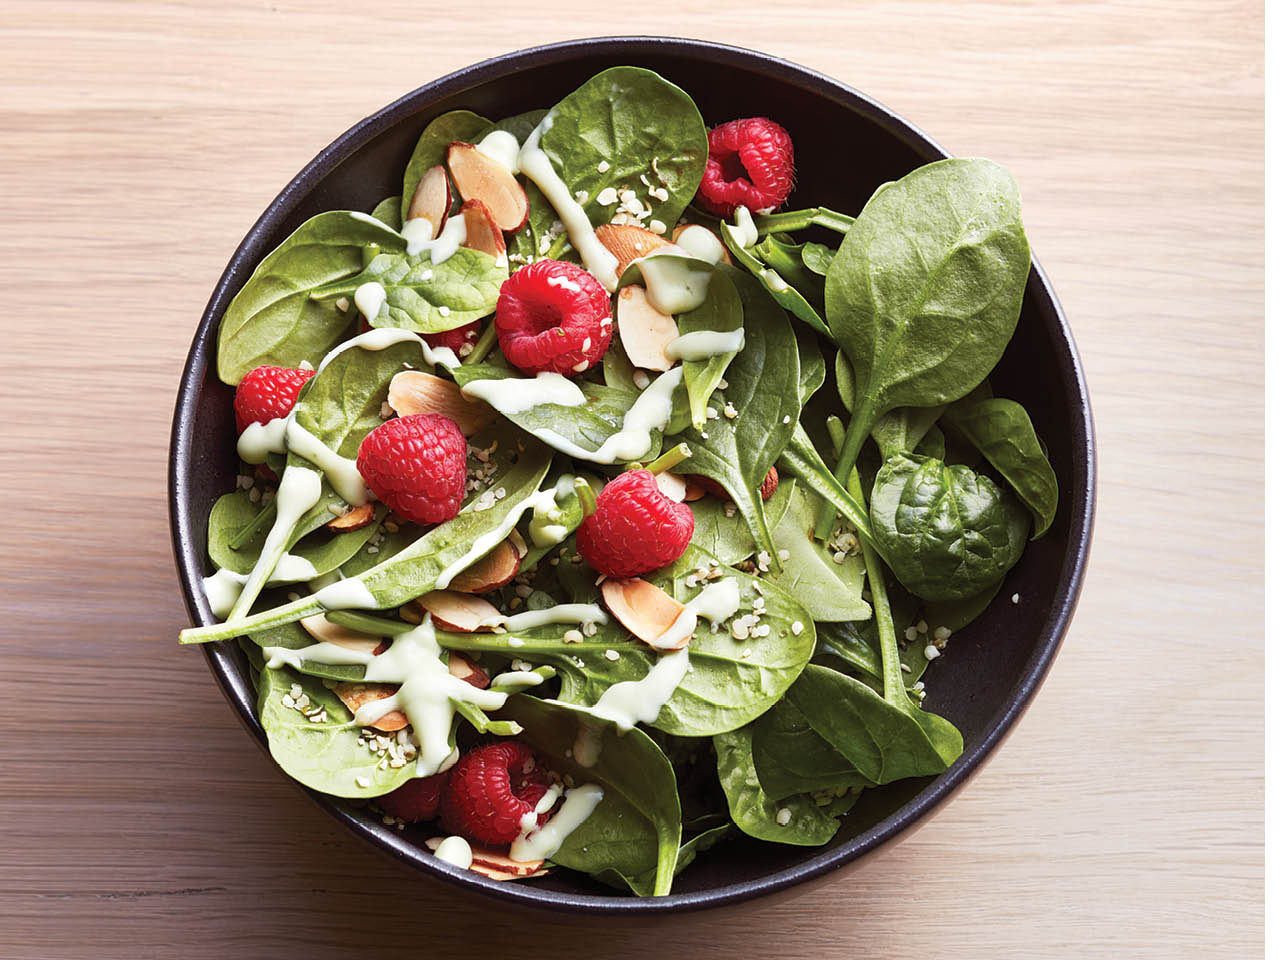 Spinach salad in a bowl with raspberries and almonds.